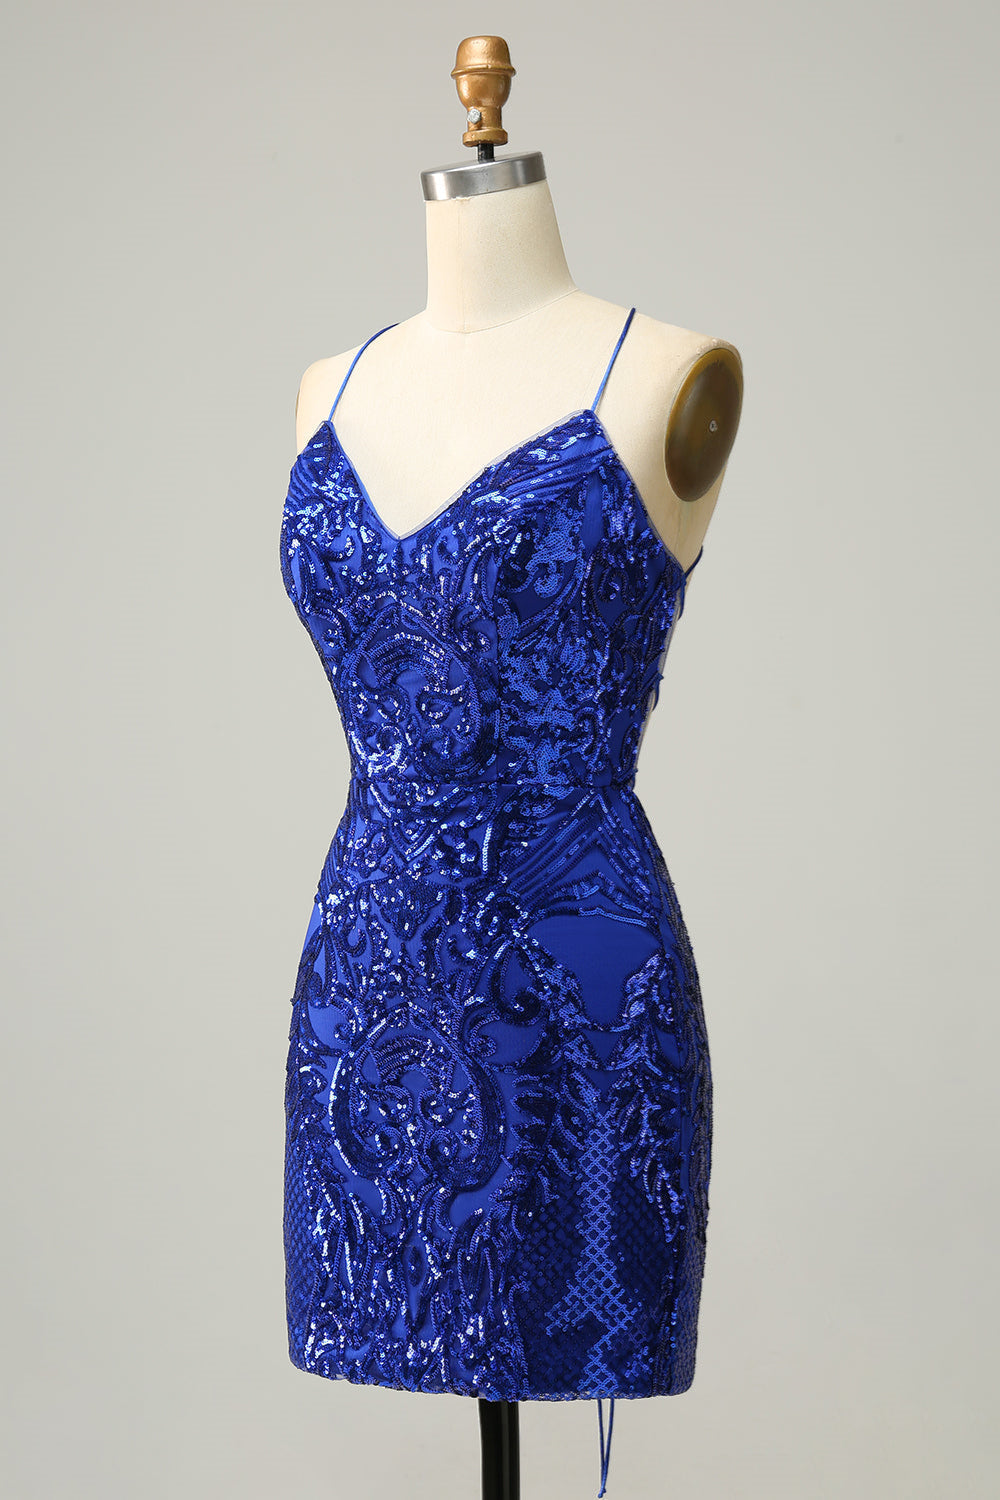 Royal Blue Sheath Lace-Up V Neck Sequins Corset Homecoming Dress outfit, Party Dressed Short